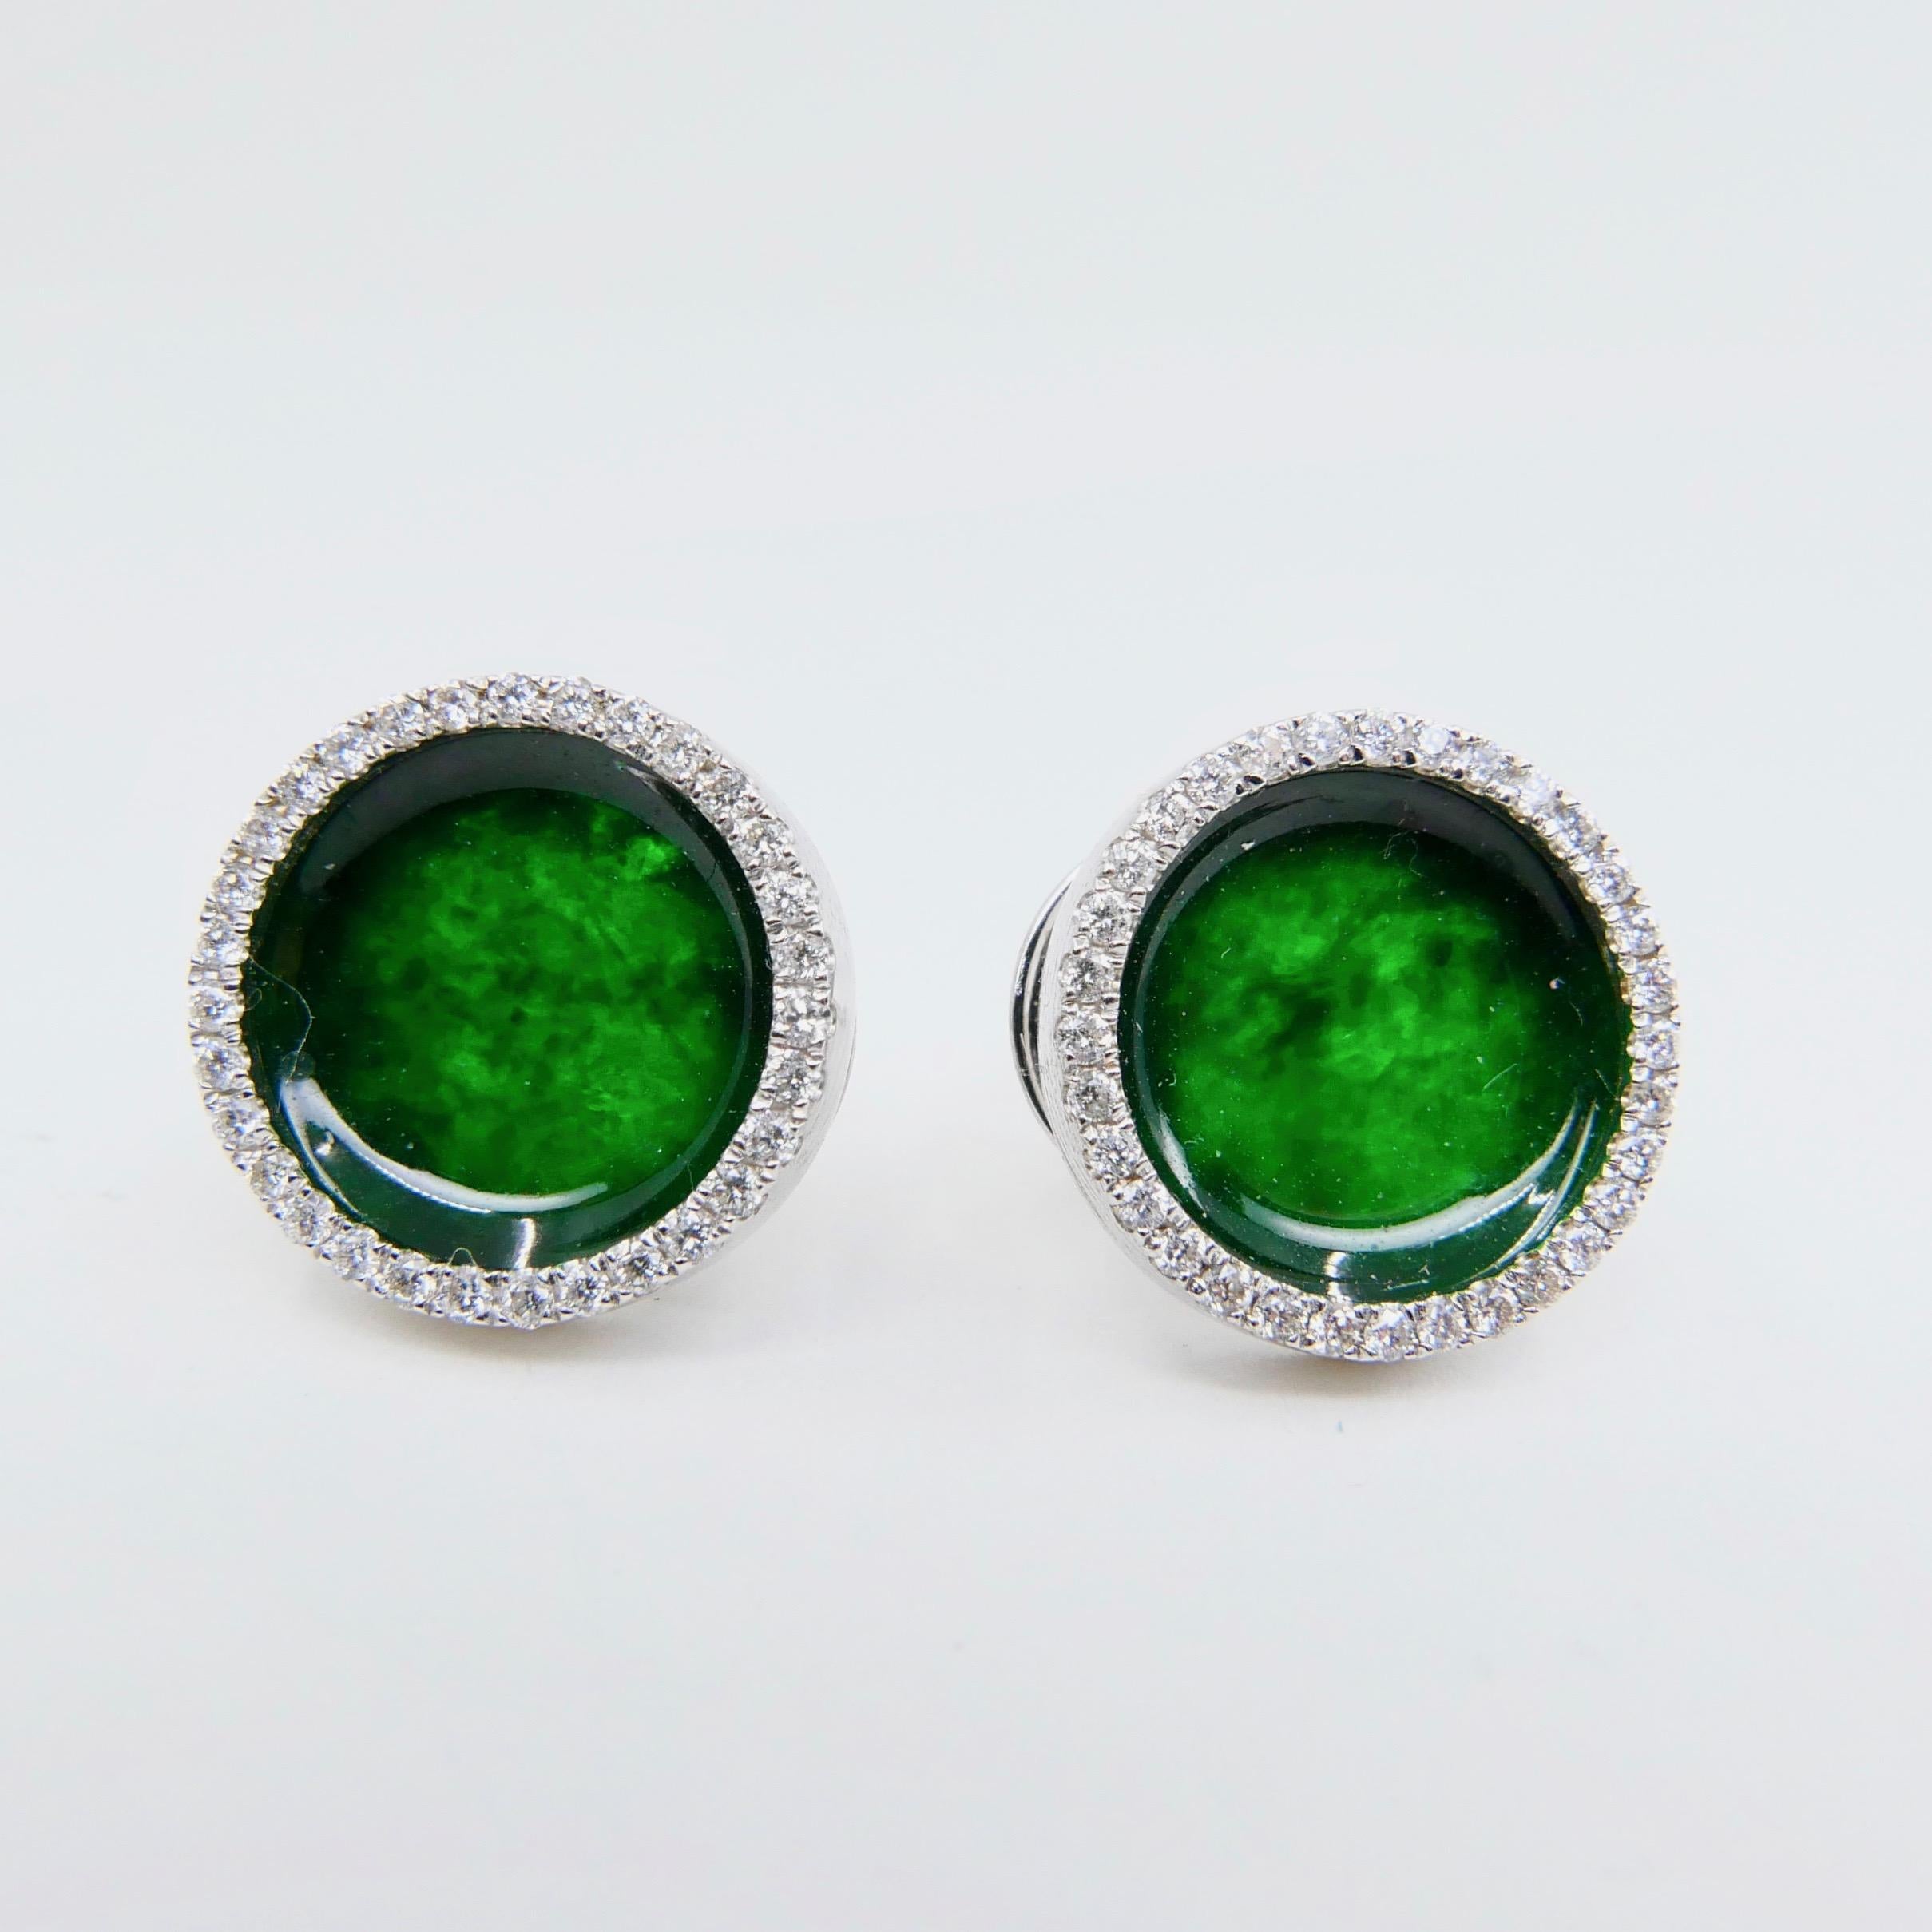 Women's Certified Natural Jadeite Type A Jade and Diamond Earrings, Spinach Green Color